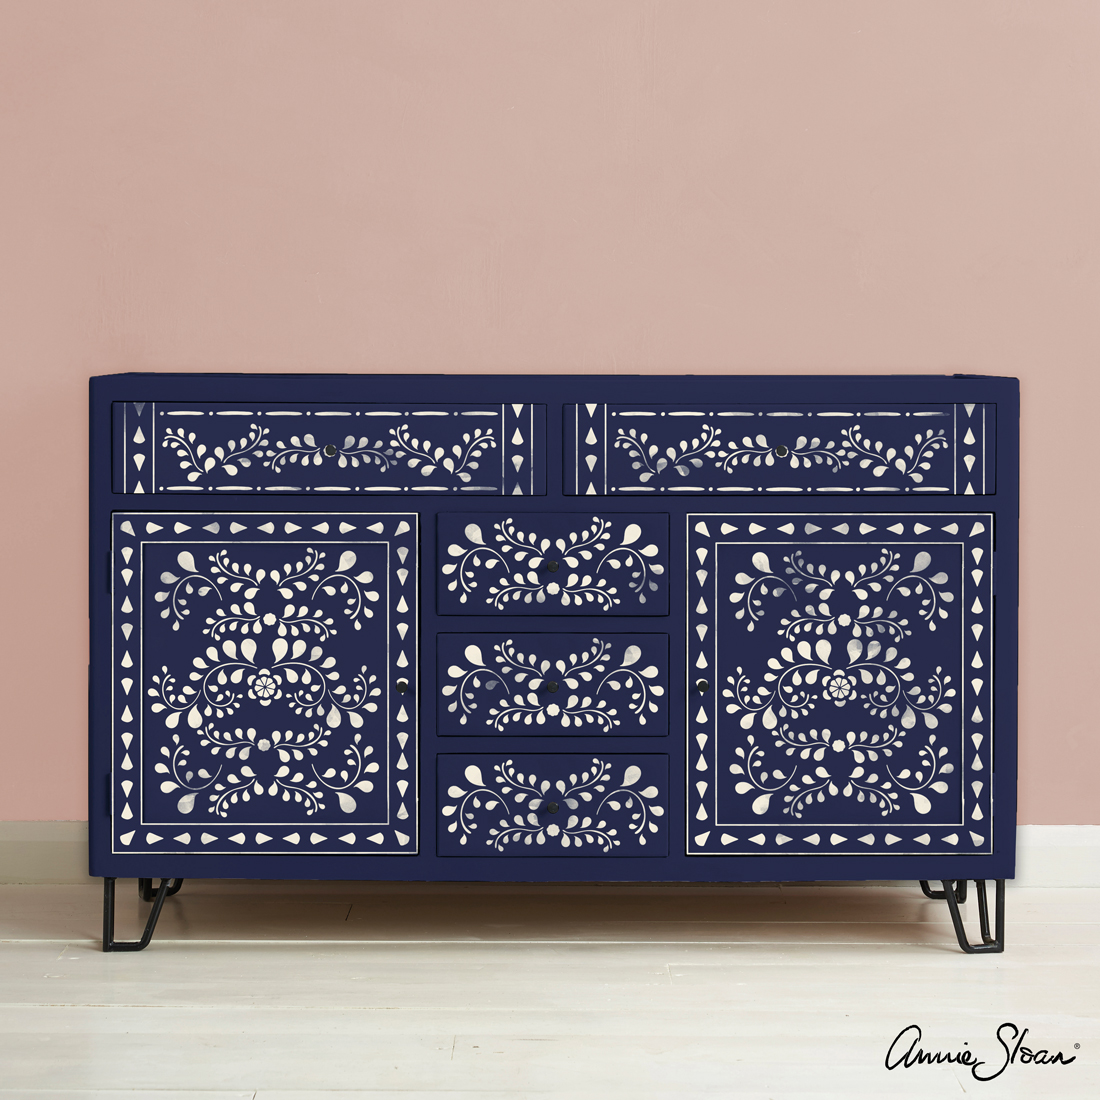 1613556822Faux-Bone-Inlay-Stencil-Furniture-Oxford-Navy-and-Antoinette-Background.jpg